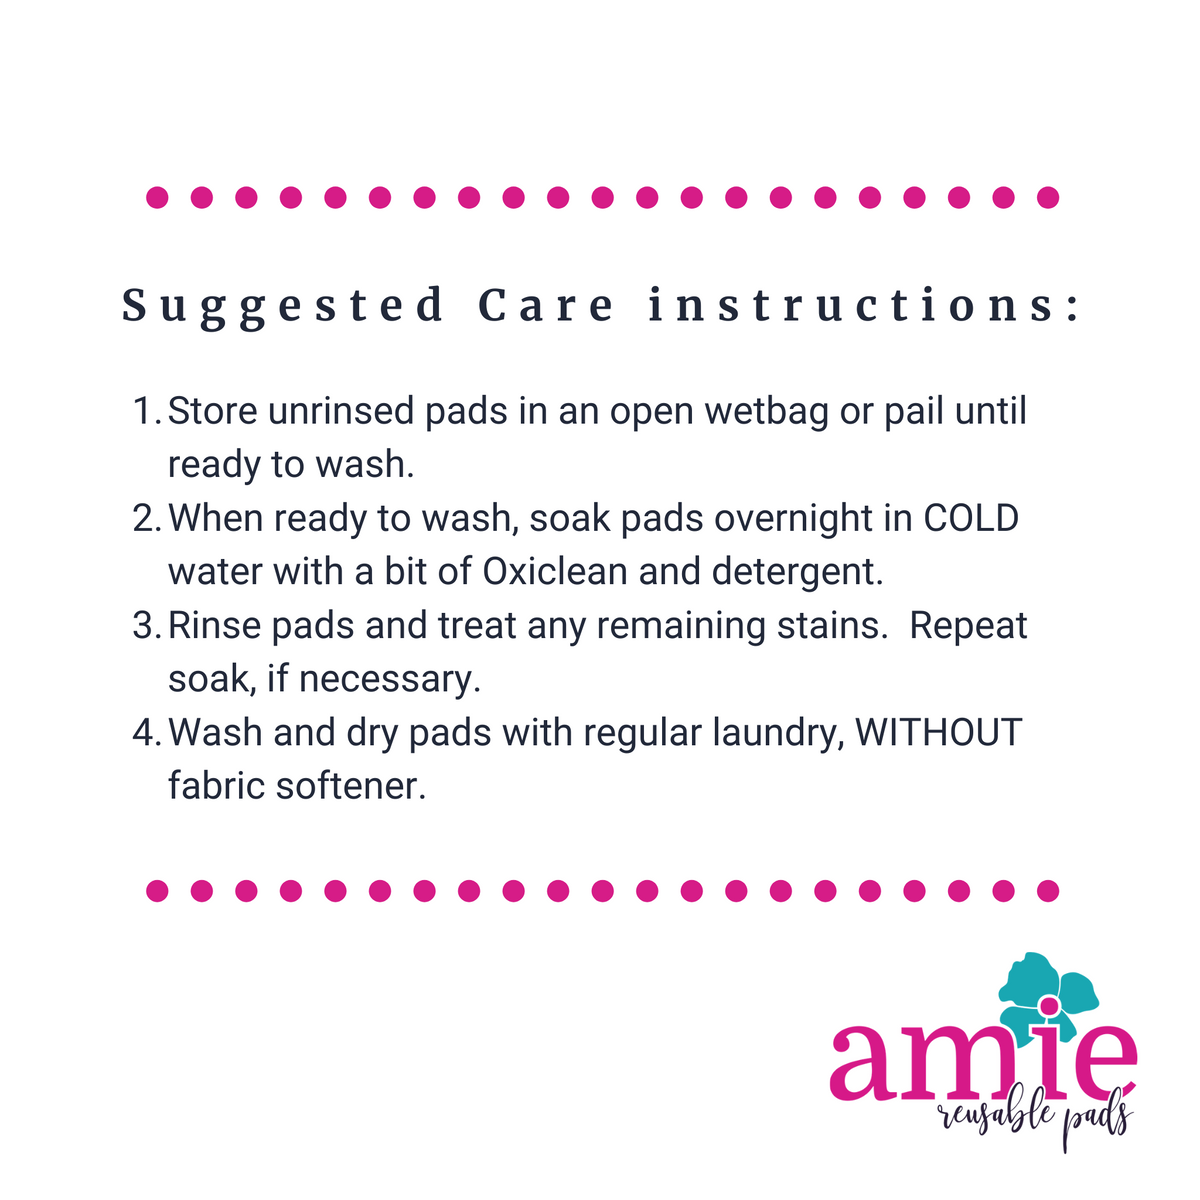 Suggested care instructions for washing Amie Reusable Pads